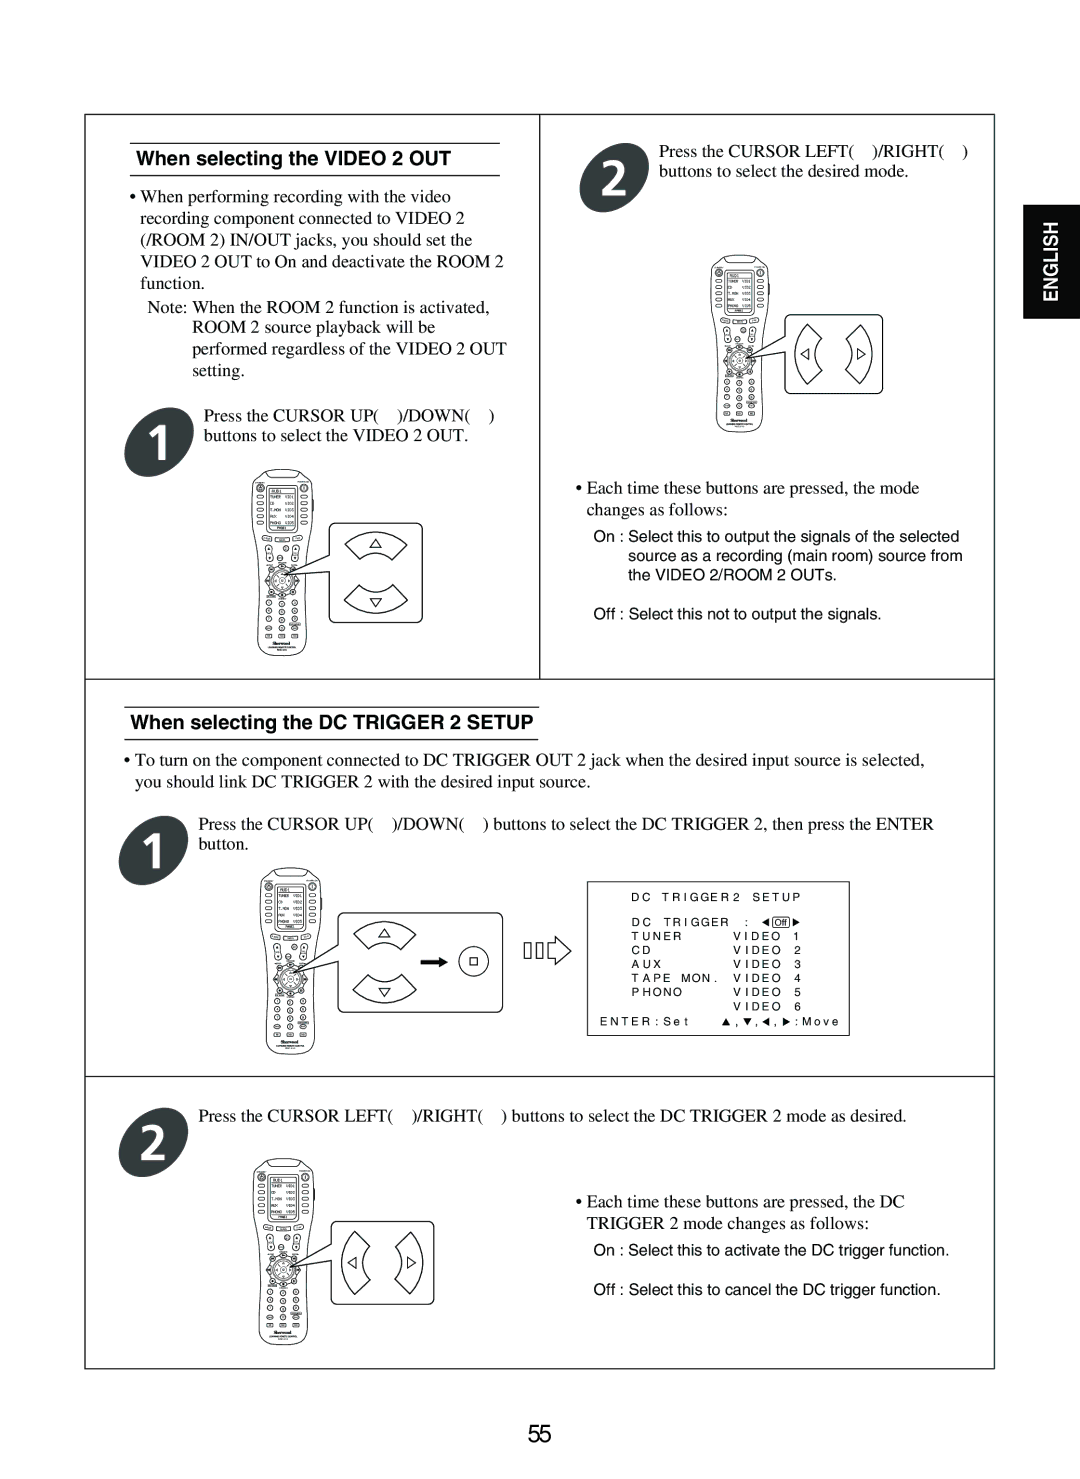 Sherwood P-965 manual When selecting the Video 2 OUT, When selecting the DC Trigger 2 Setup 